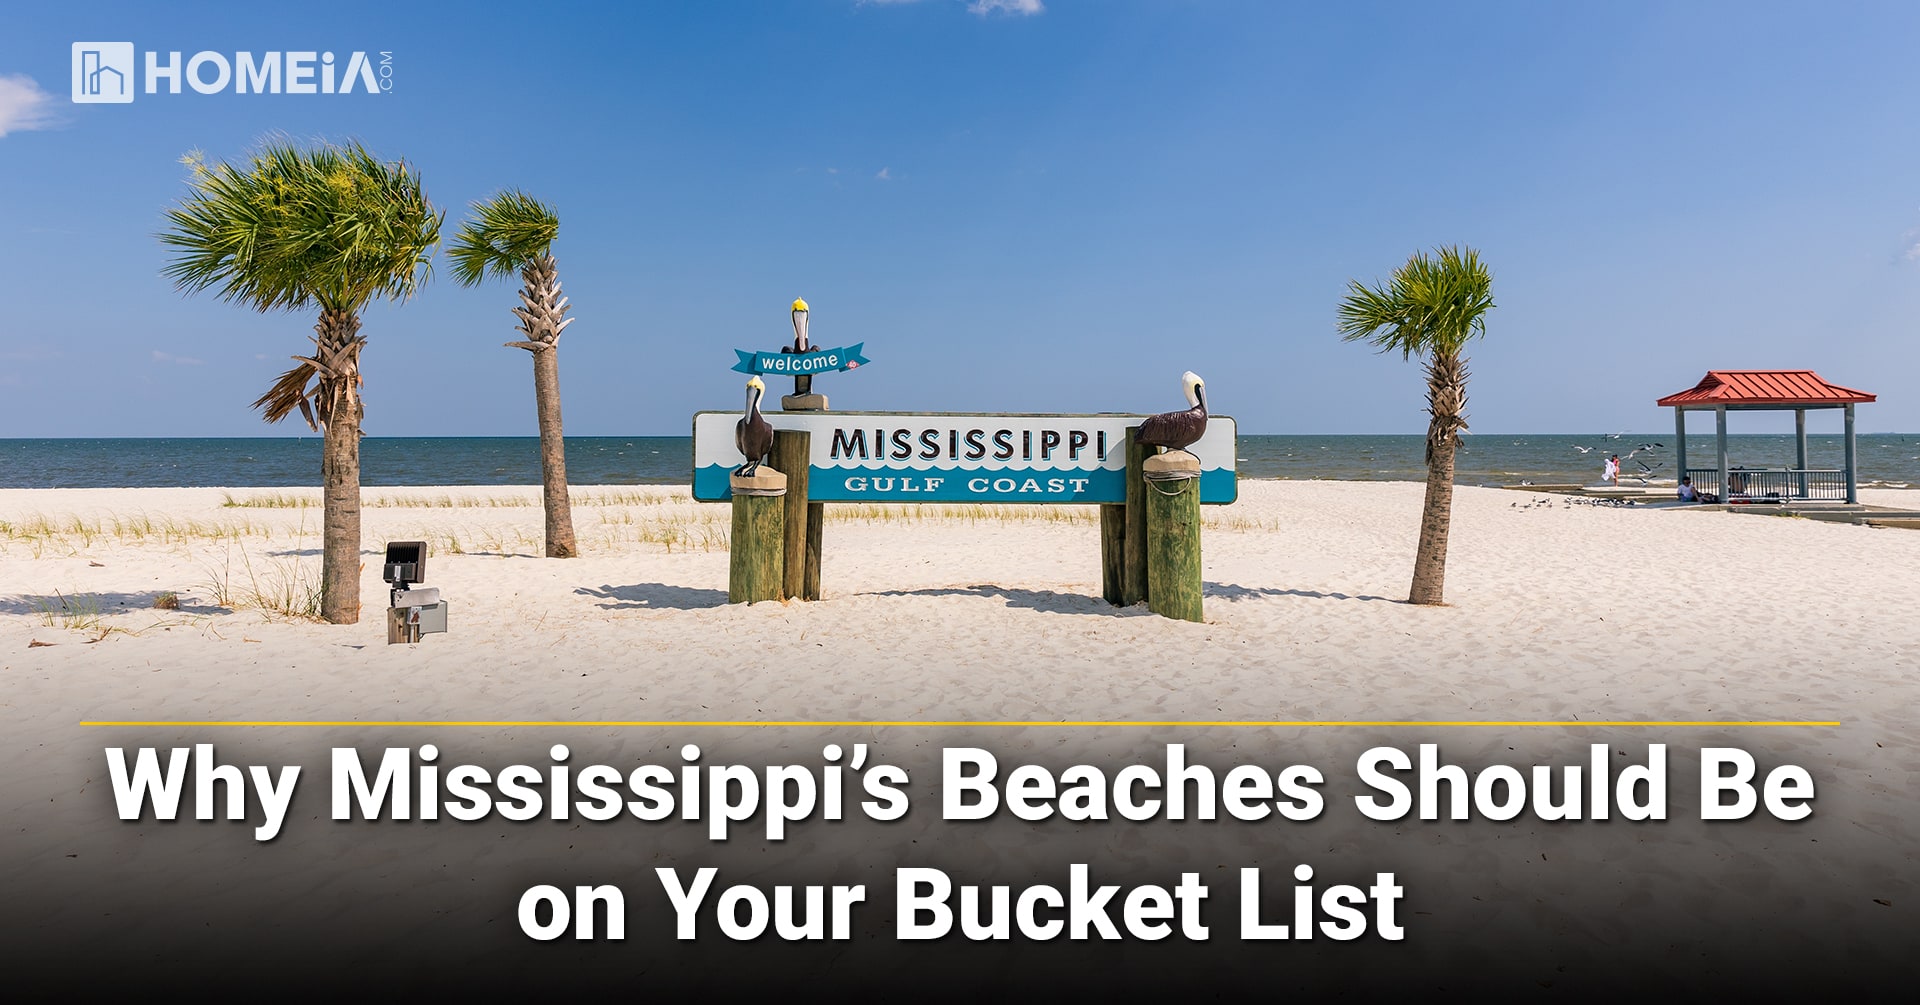 Why Mississippi’s Beaches Should Be on Your Bucket List